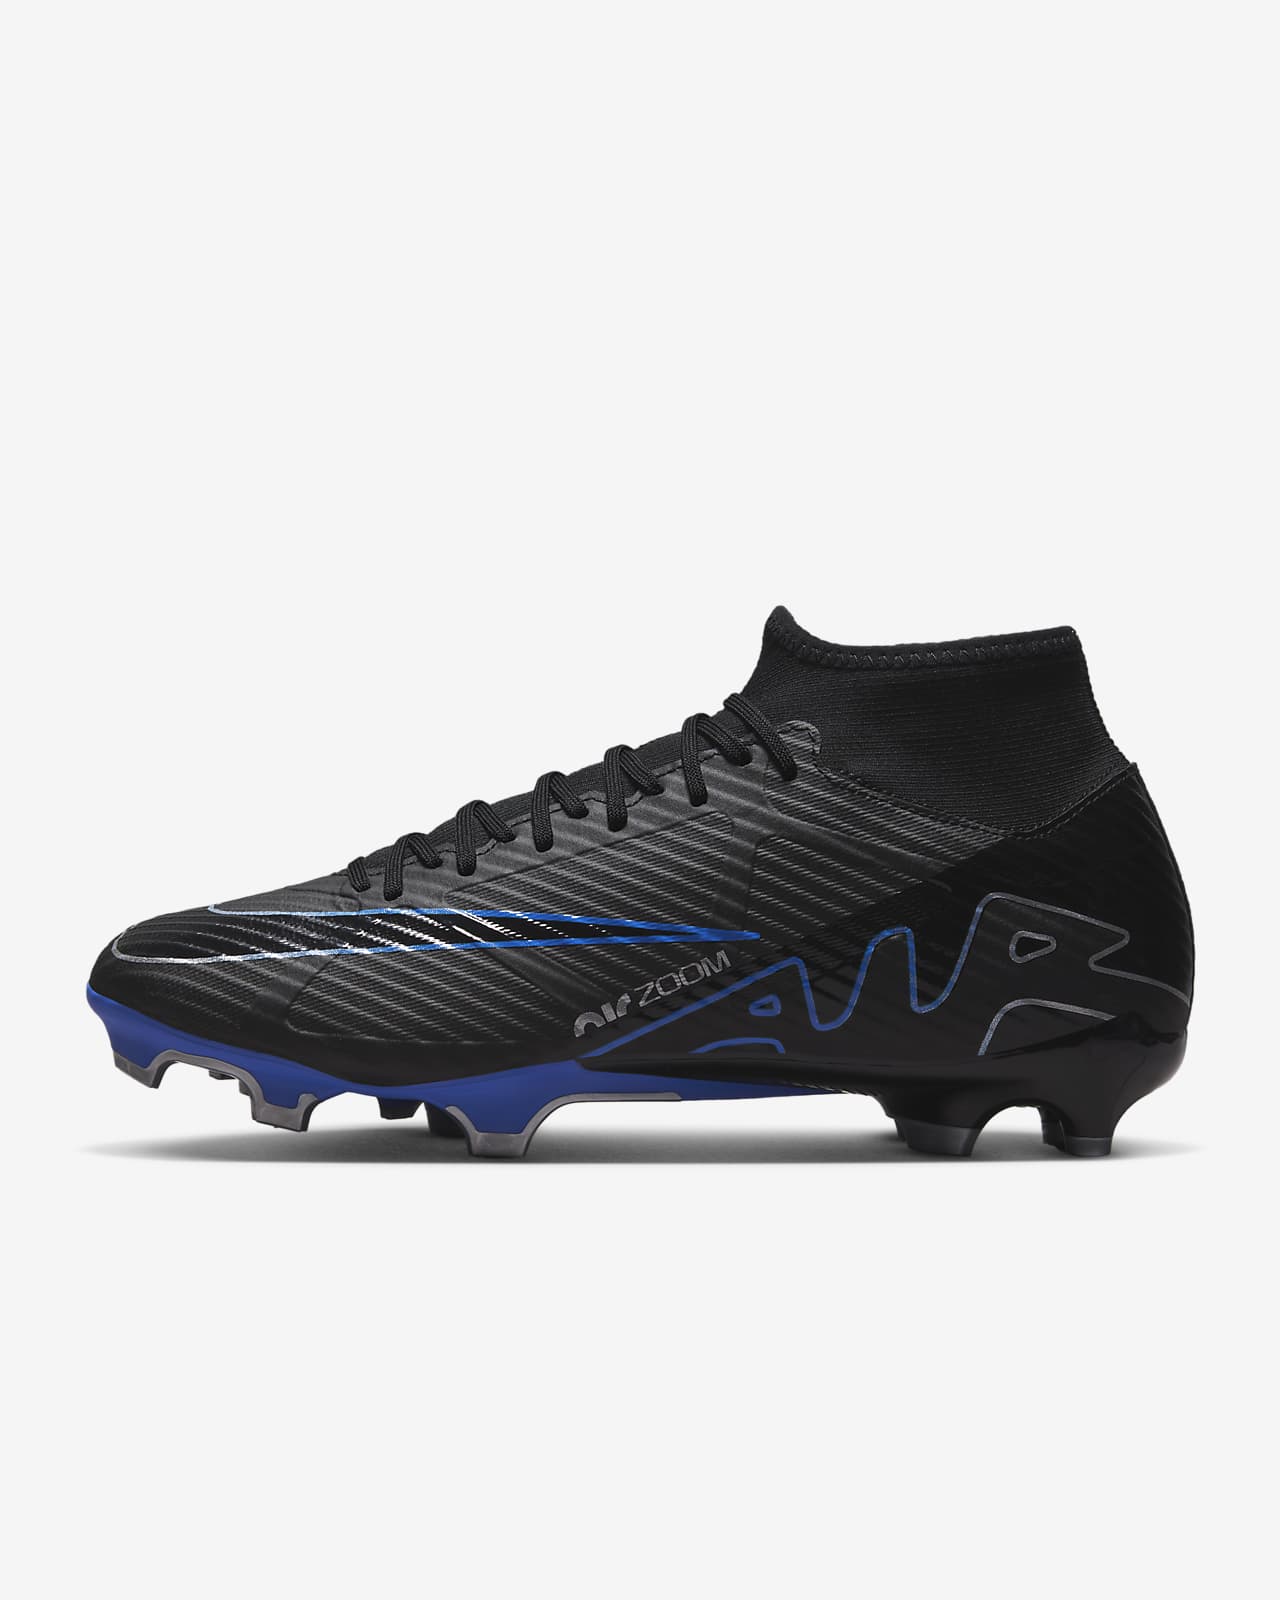 Chaussure de foot à crampons montante multi-surfaces Nike Mercurial Superfly 9 Academy